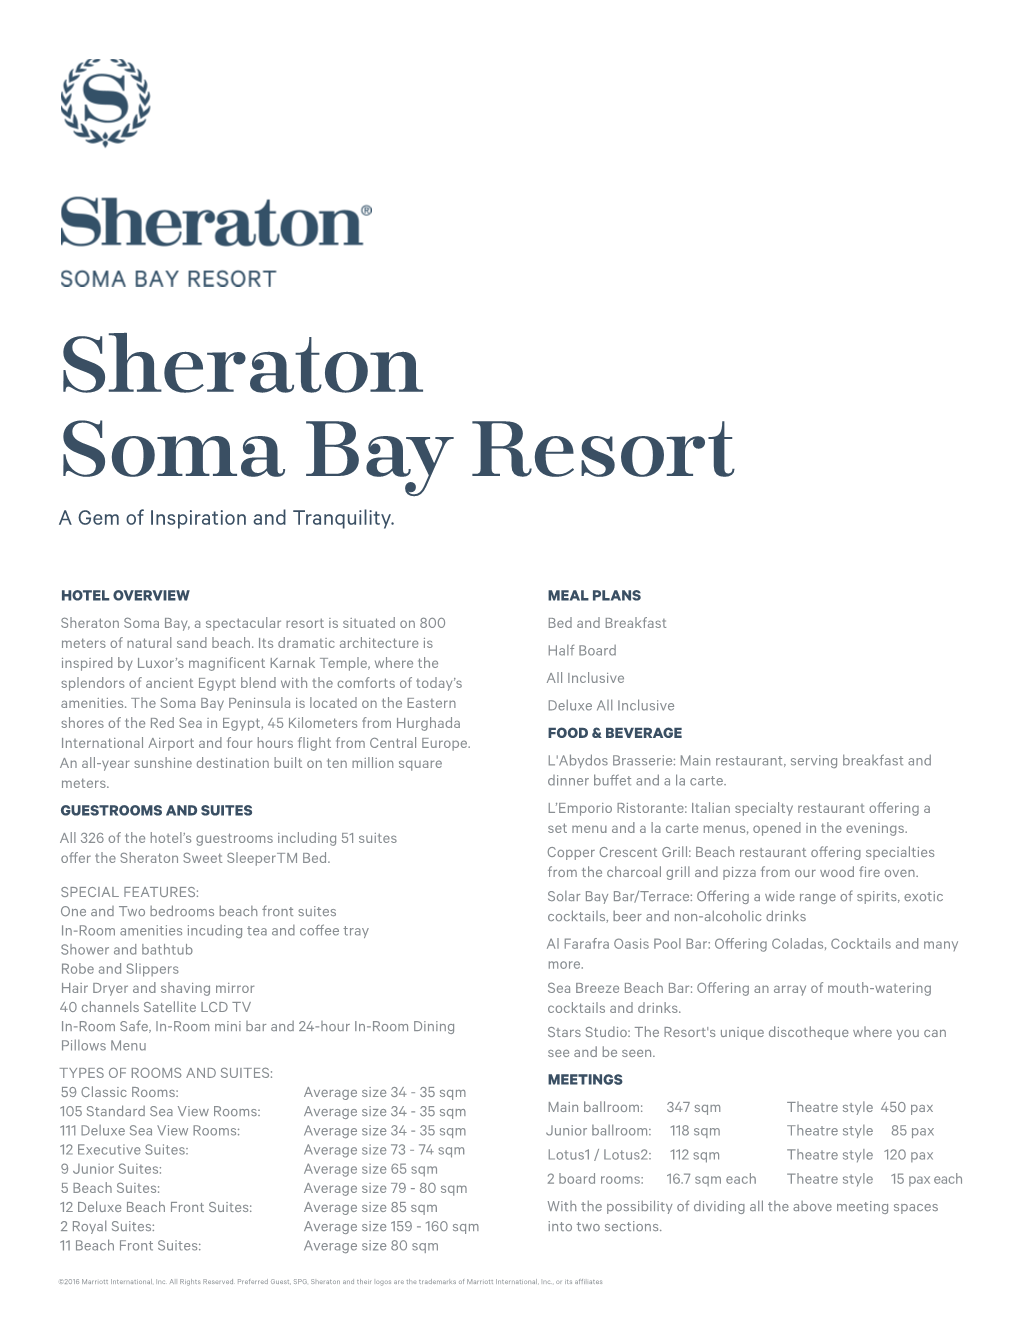 Sheraton Soma Bay Resort a Gem of Inspiration and Tranquility